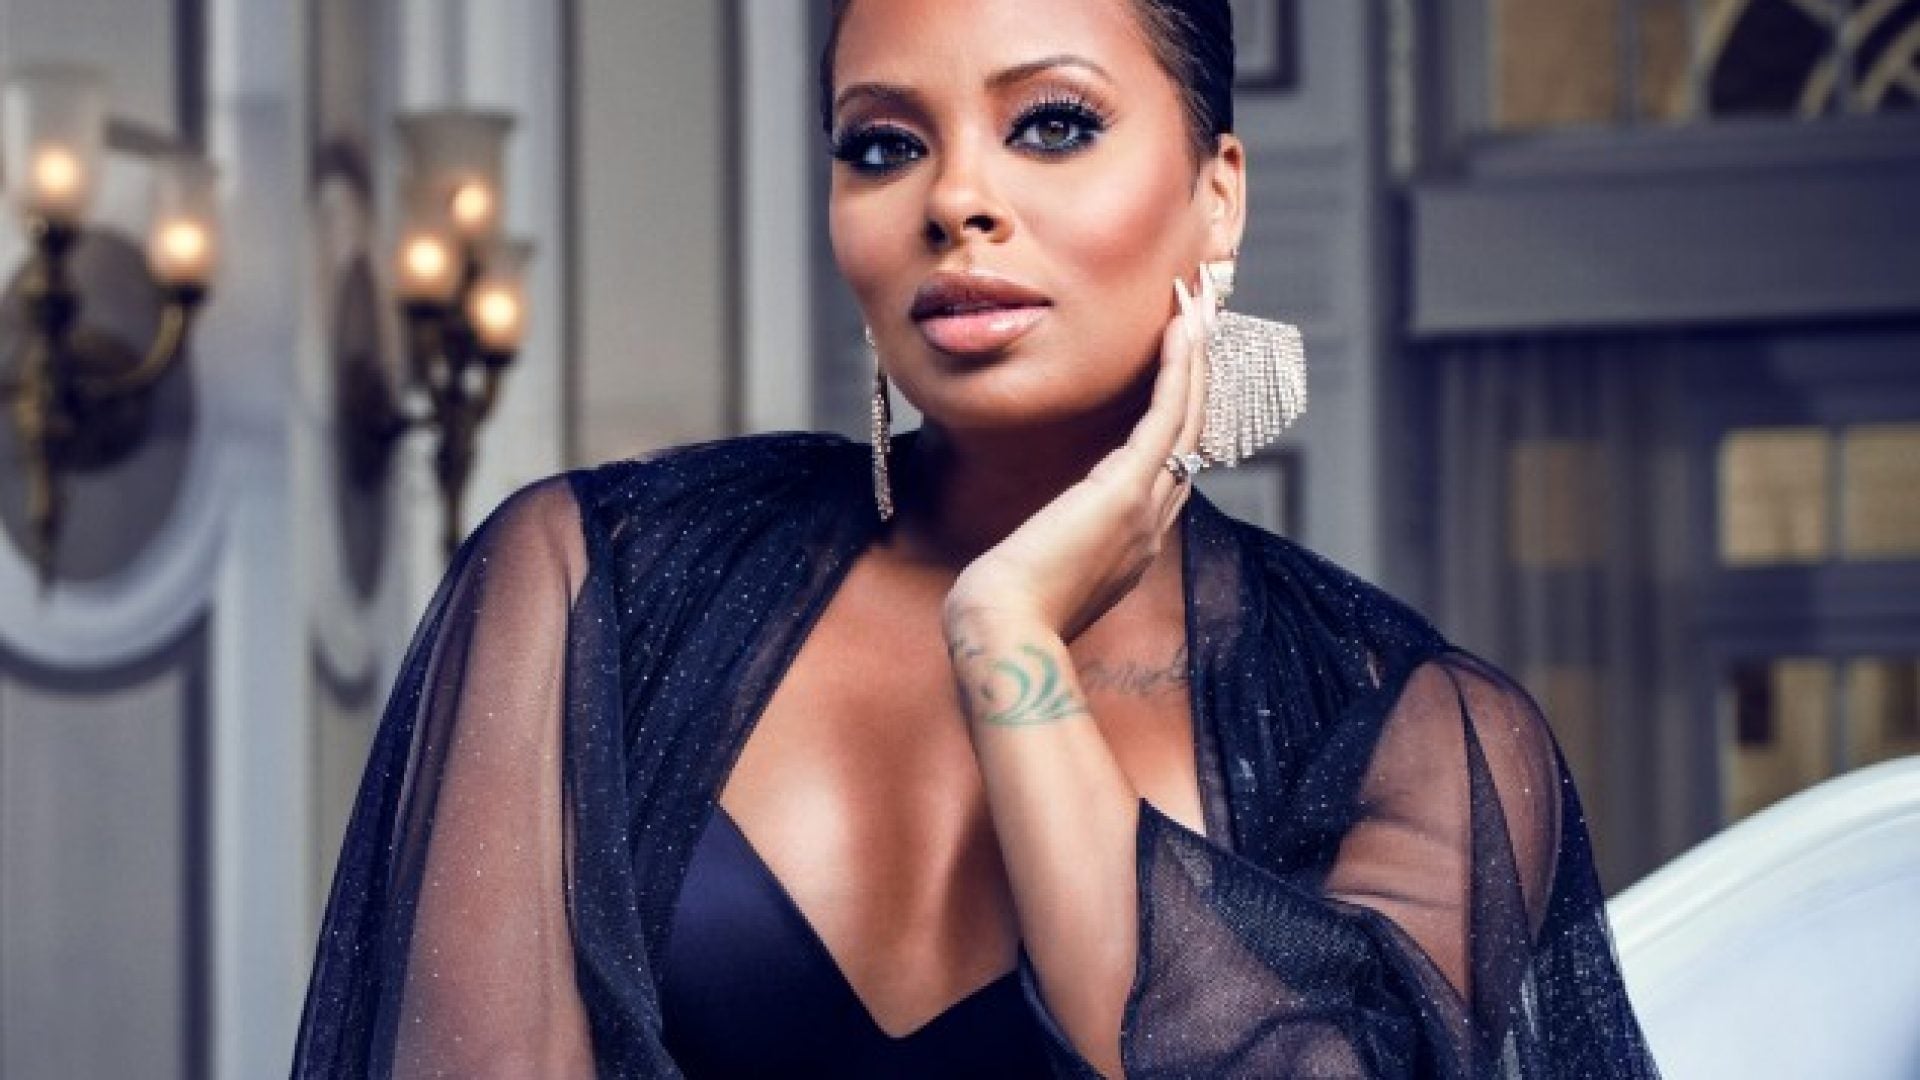 Eva Marcille Took Blond Hair To The Next Level At Black Women In Hollywood